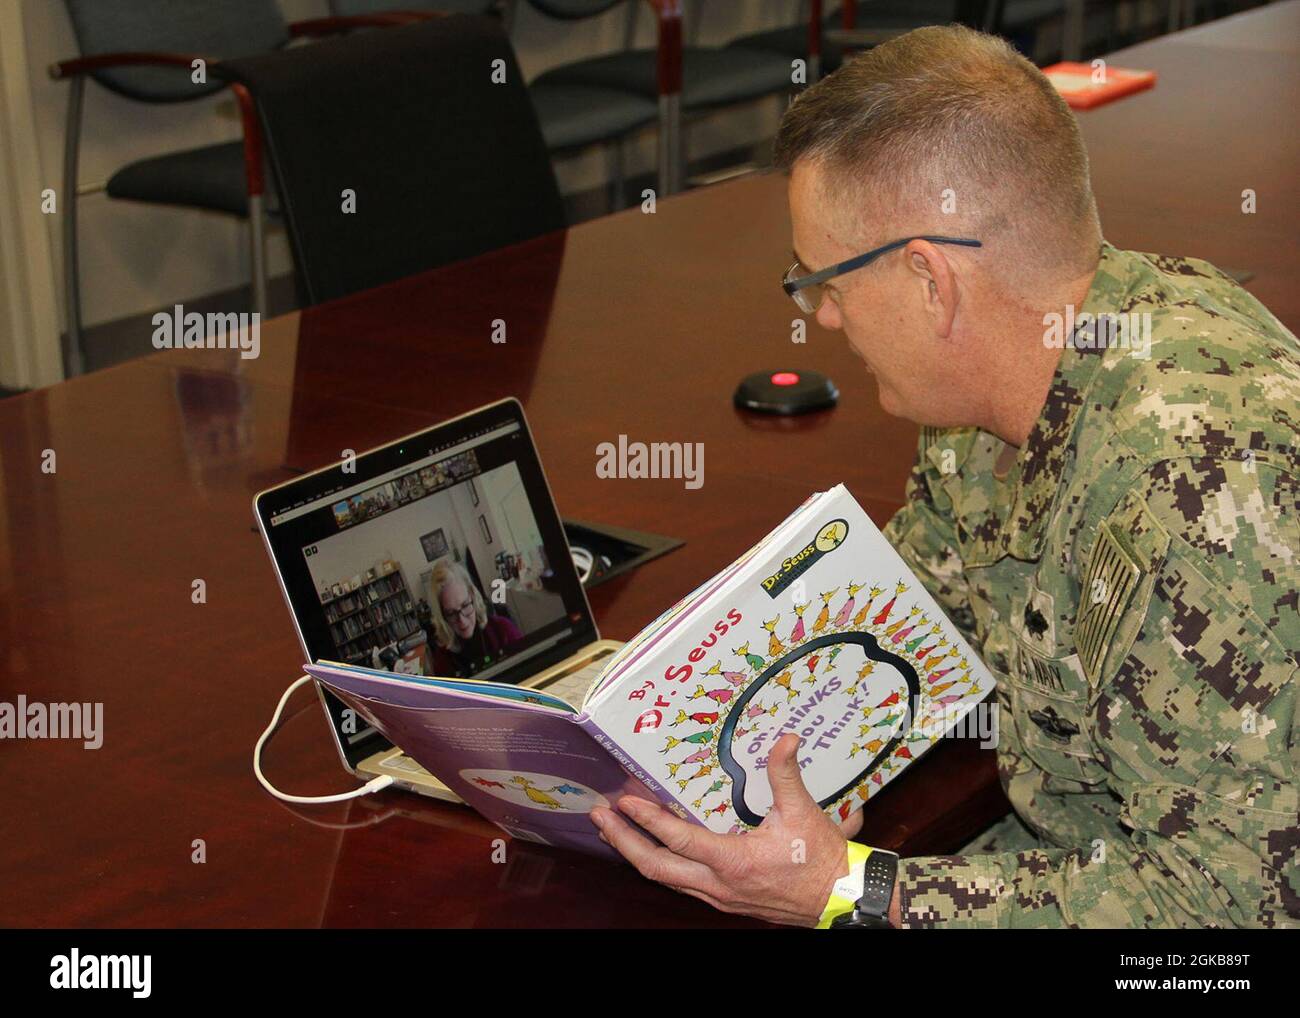 210302-N-HC520-001 NORFOLK, Va. (March 2, 2021) Capt. Tres Meek, commanding officer of NAVFAC Mid-Atlantic, reads to a virtual classroom of students from Saint Patrick Catholic School in Norfolk, Va. as part of Read Across America Day, Mar. 2. The day was established in 1998 by the National Education Association (NEA) as a way to encourage school-aged children to read more, and is often recognized by special programs, ceremonies and activities across the country. Stock Photo